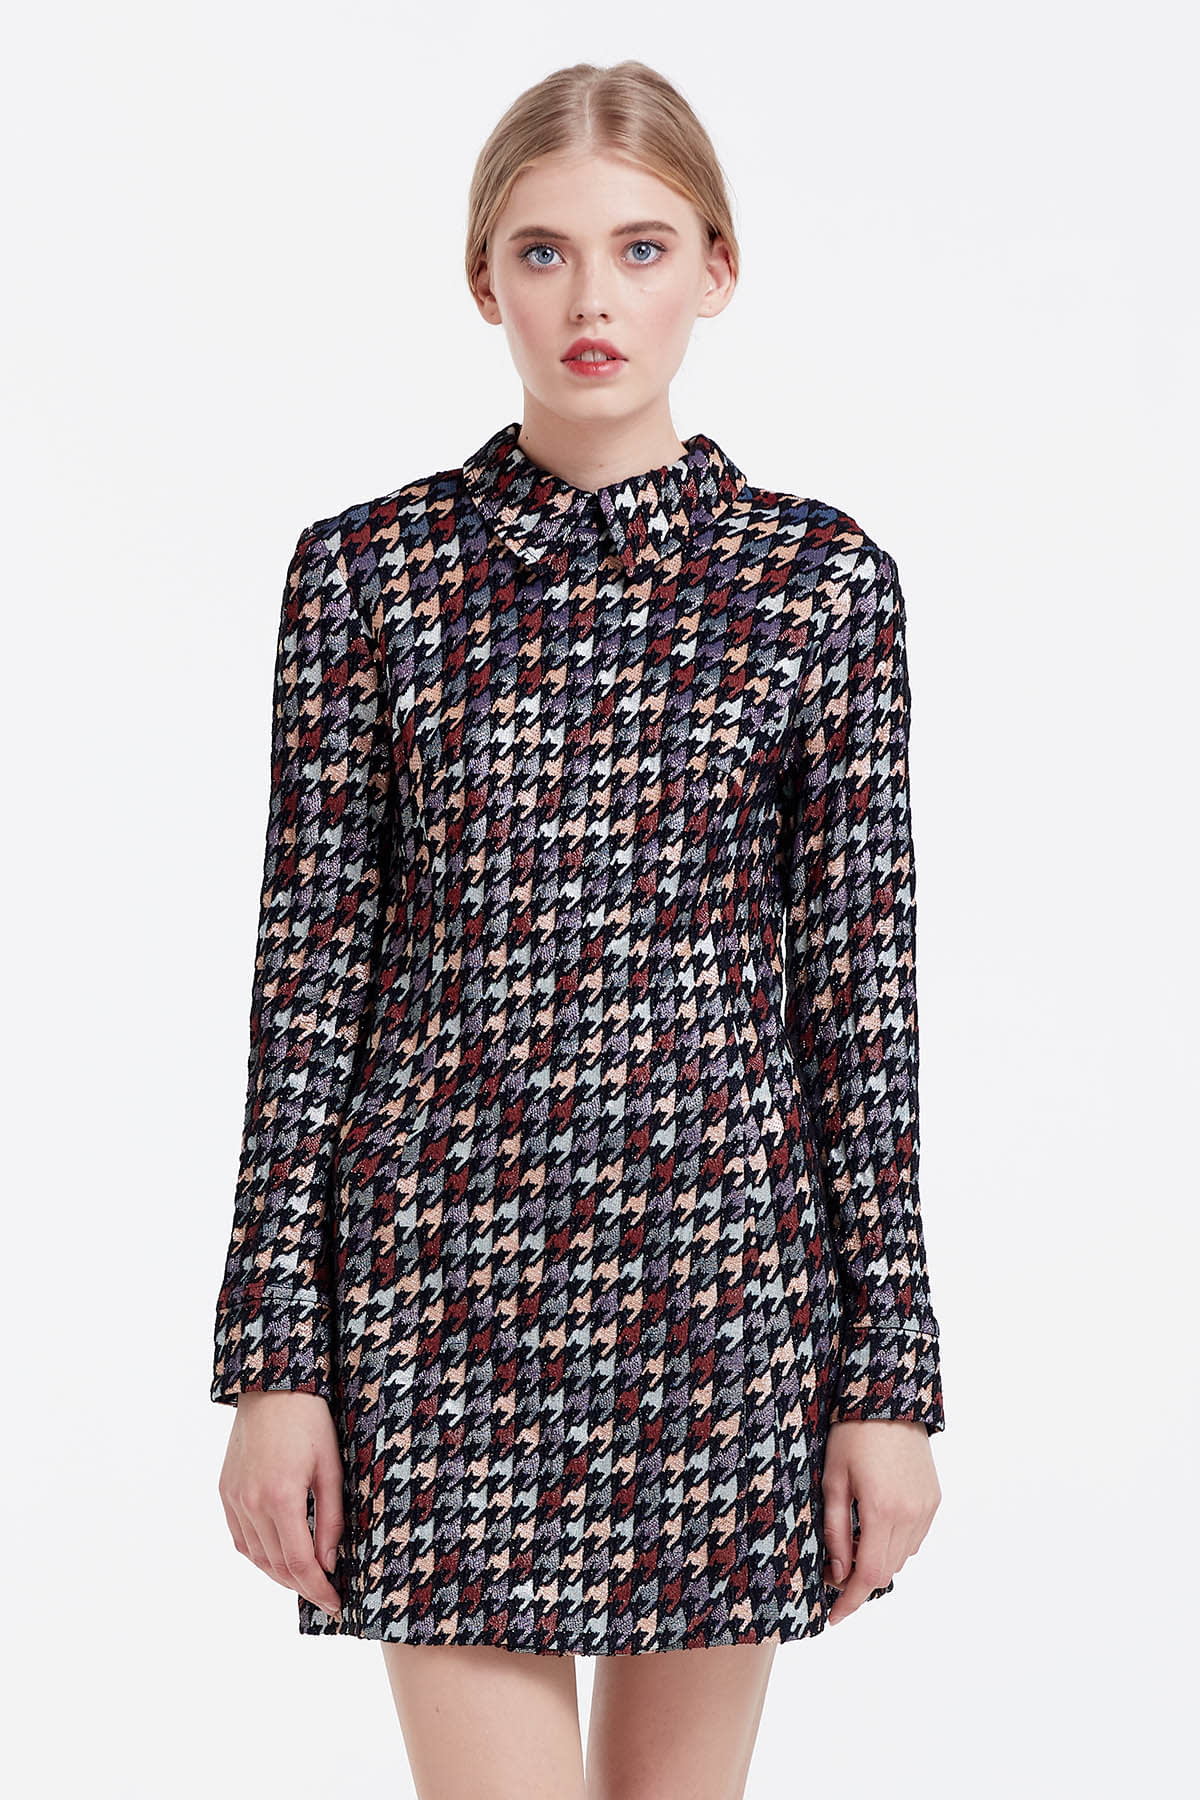 Mini dress with a houndstooth print and a collar, photo 1